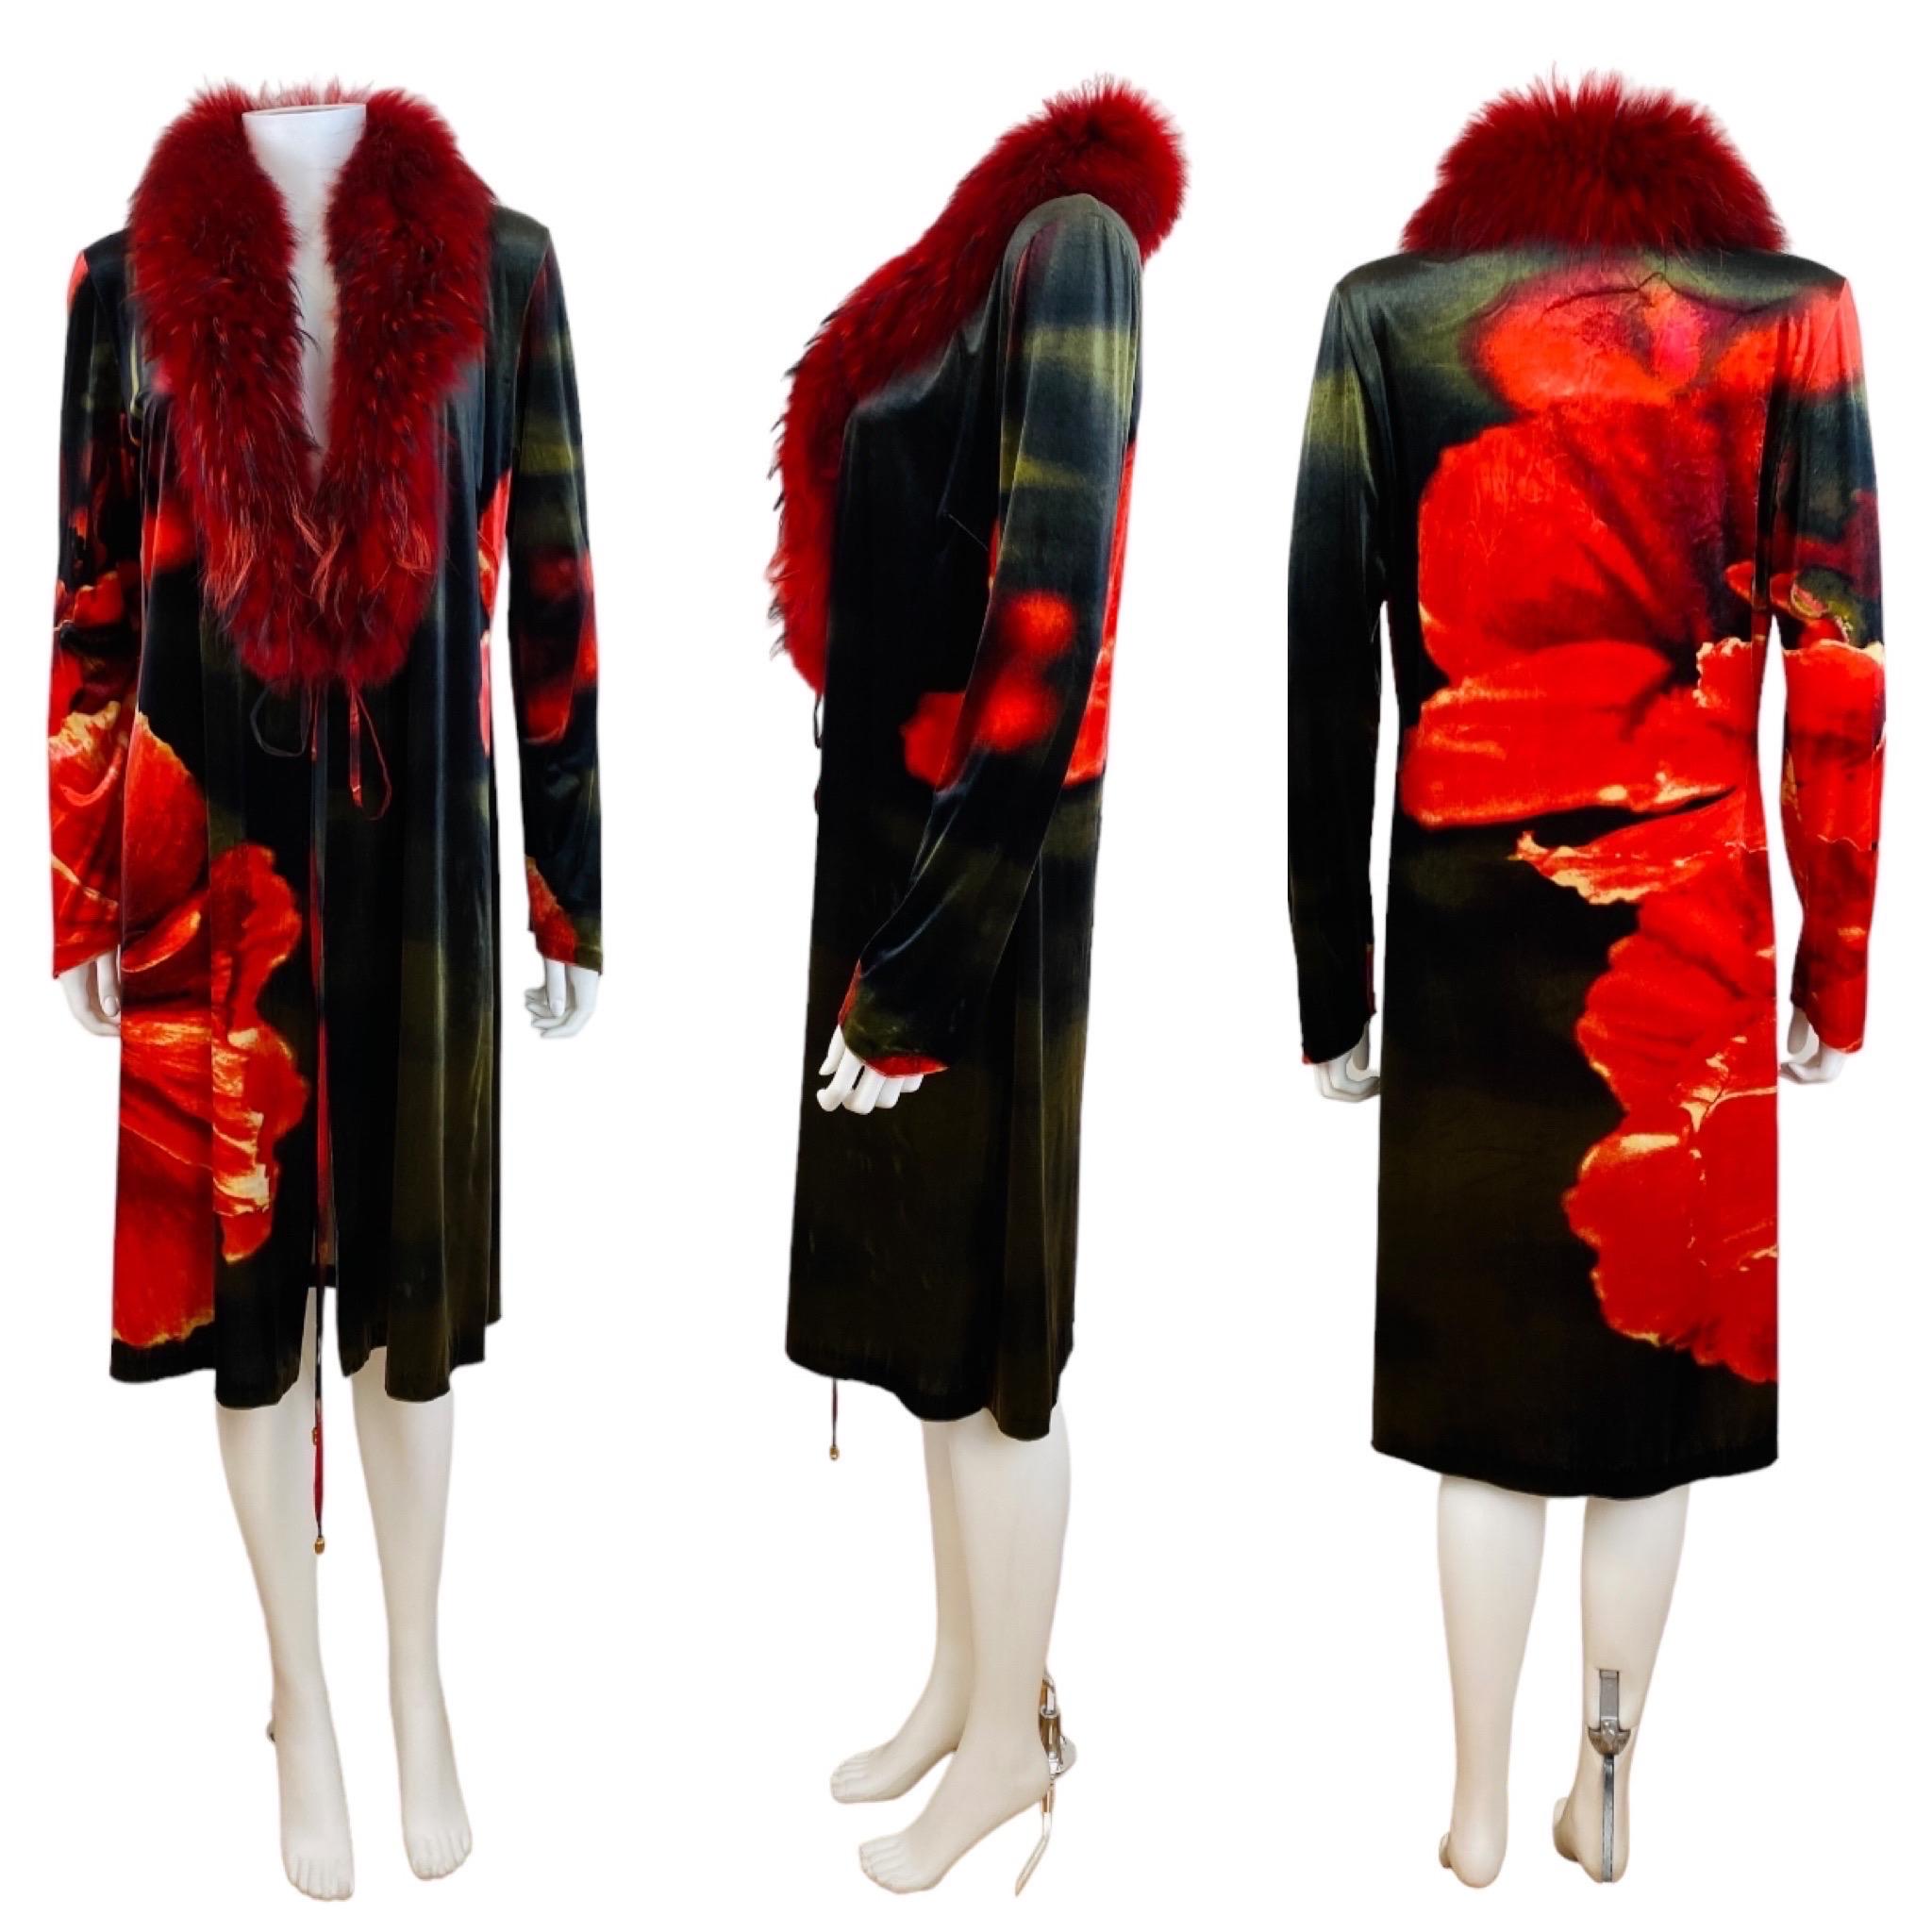 1999 Roberto Cavalli dress or jacket
Stretch velvet fabric with bold oversized abstract floral print
Can be worn wrap style as a dress or as a jacket
Long tapered sleeves
V neckline trimmed in red fox fur collar
Long silk ties at the waist with gold